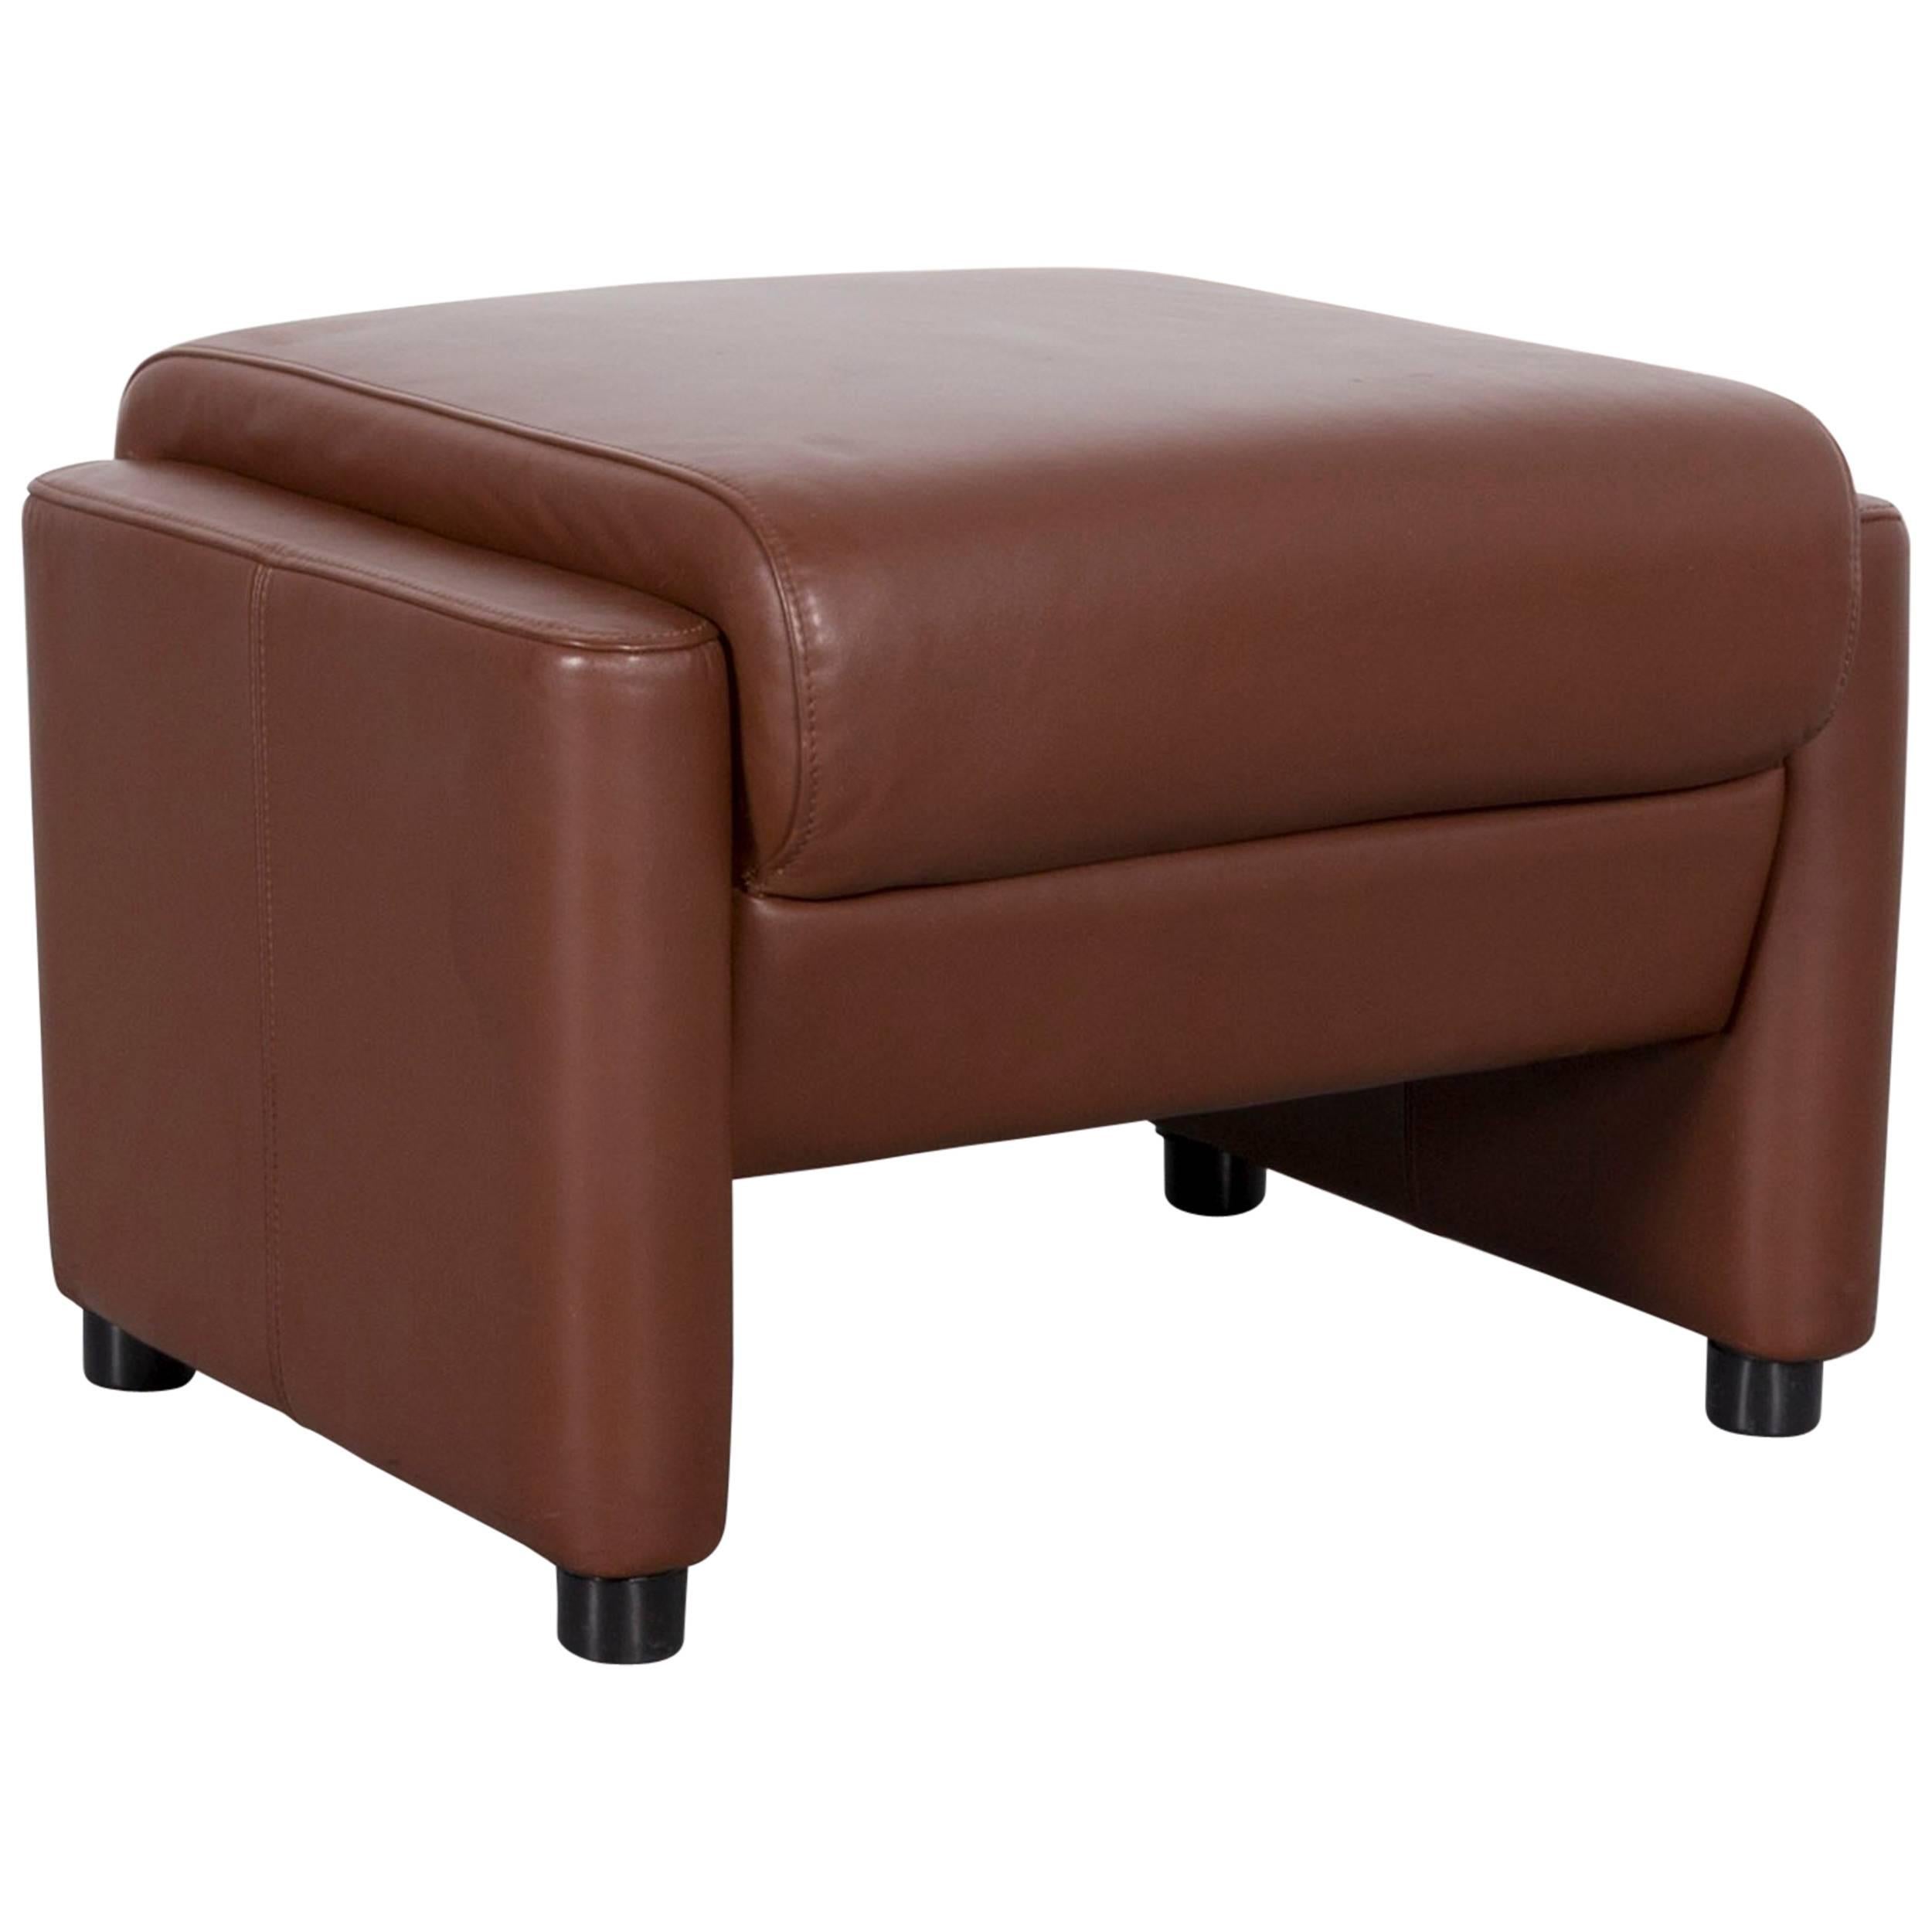 Erpo Designer Footstool Leather Brown Sofa Couch For Sale